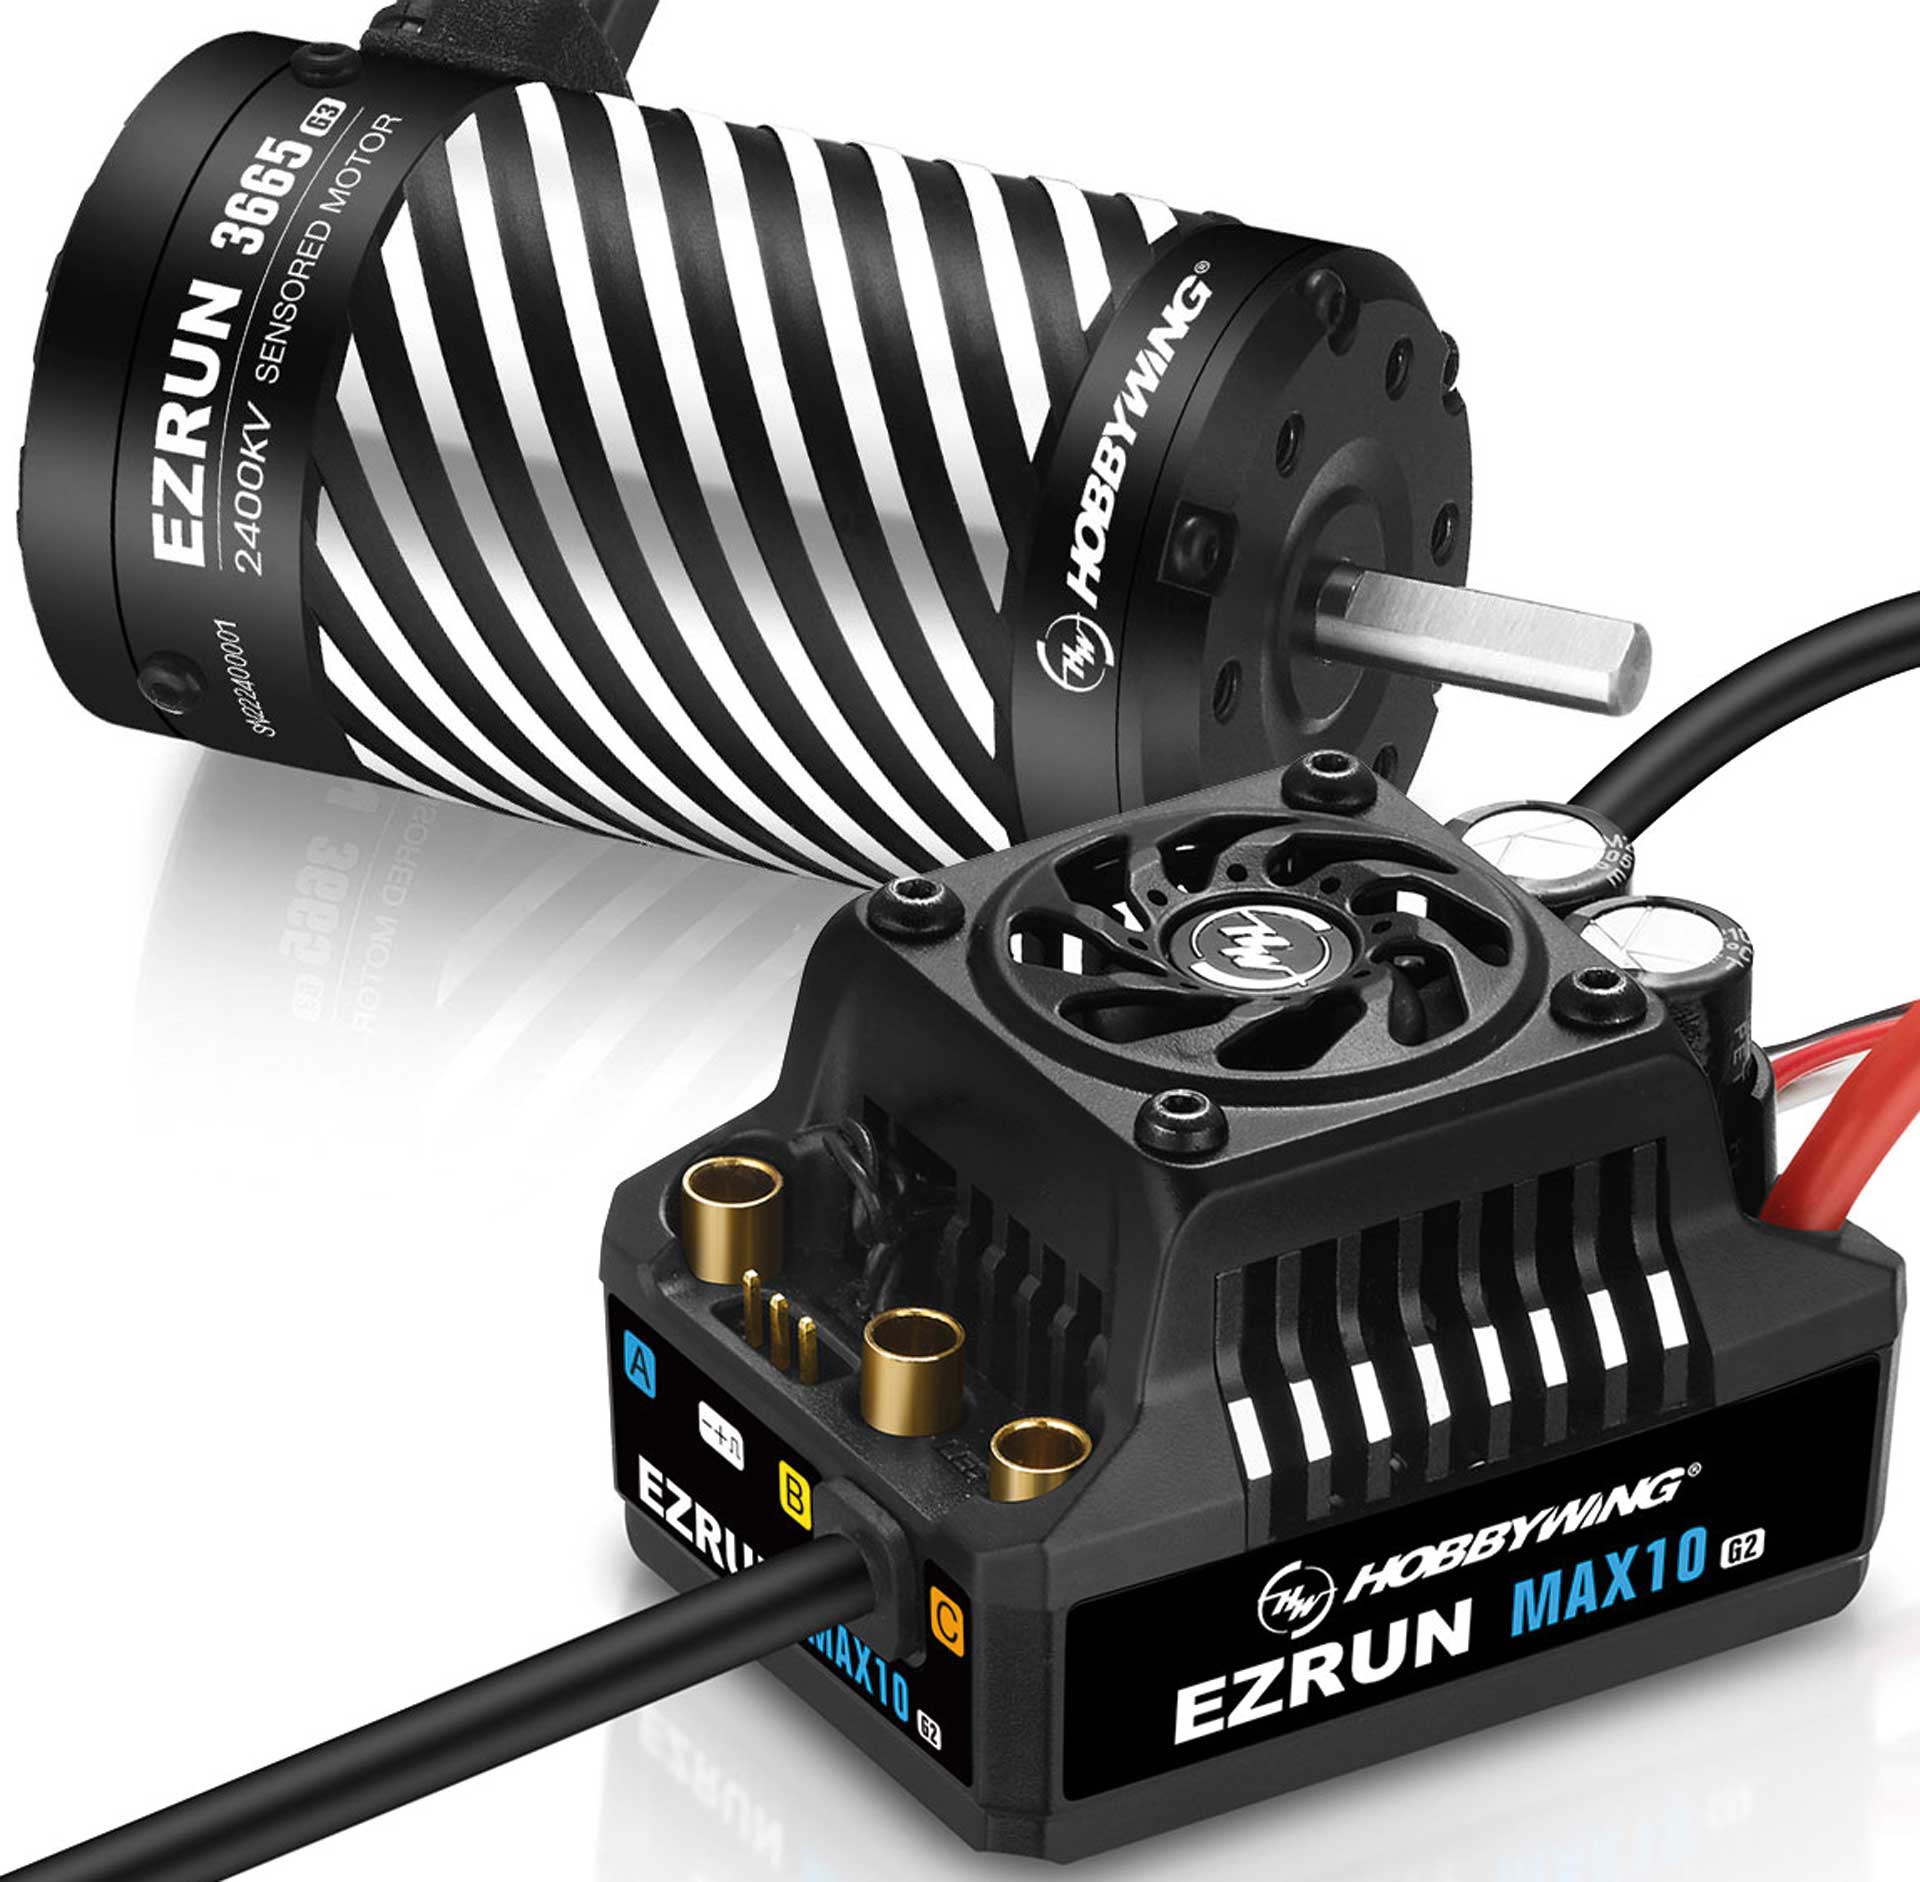 HOBBYWING Ezrun MAX10 G2 140A Combo mit 3665SD 2400kV 5mm Welle